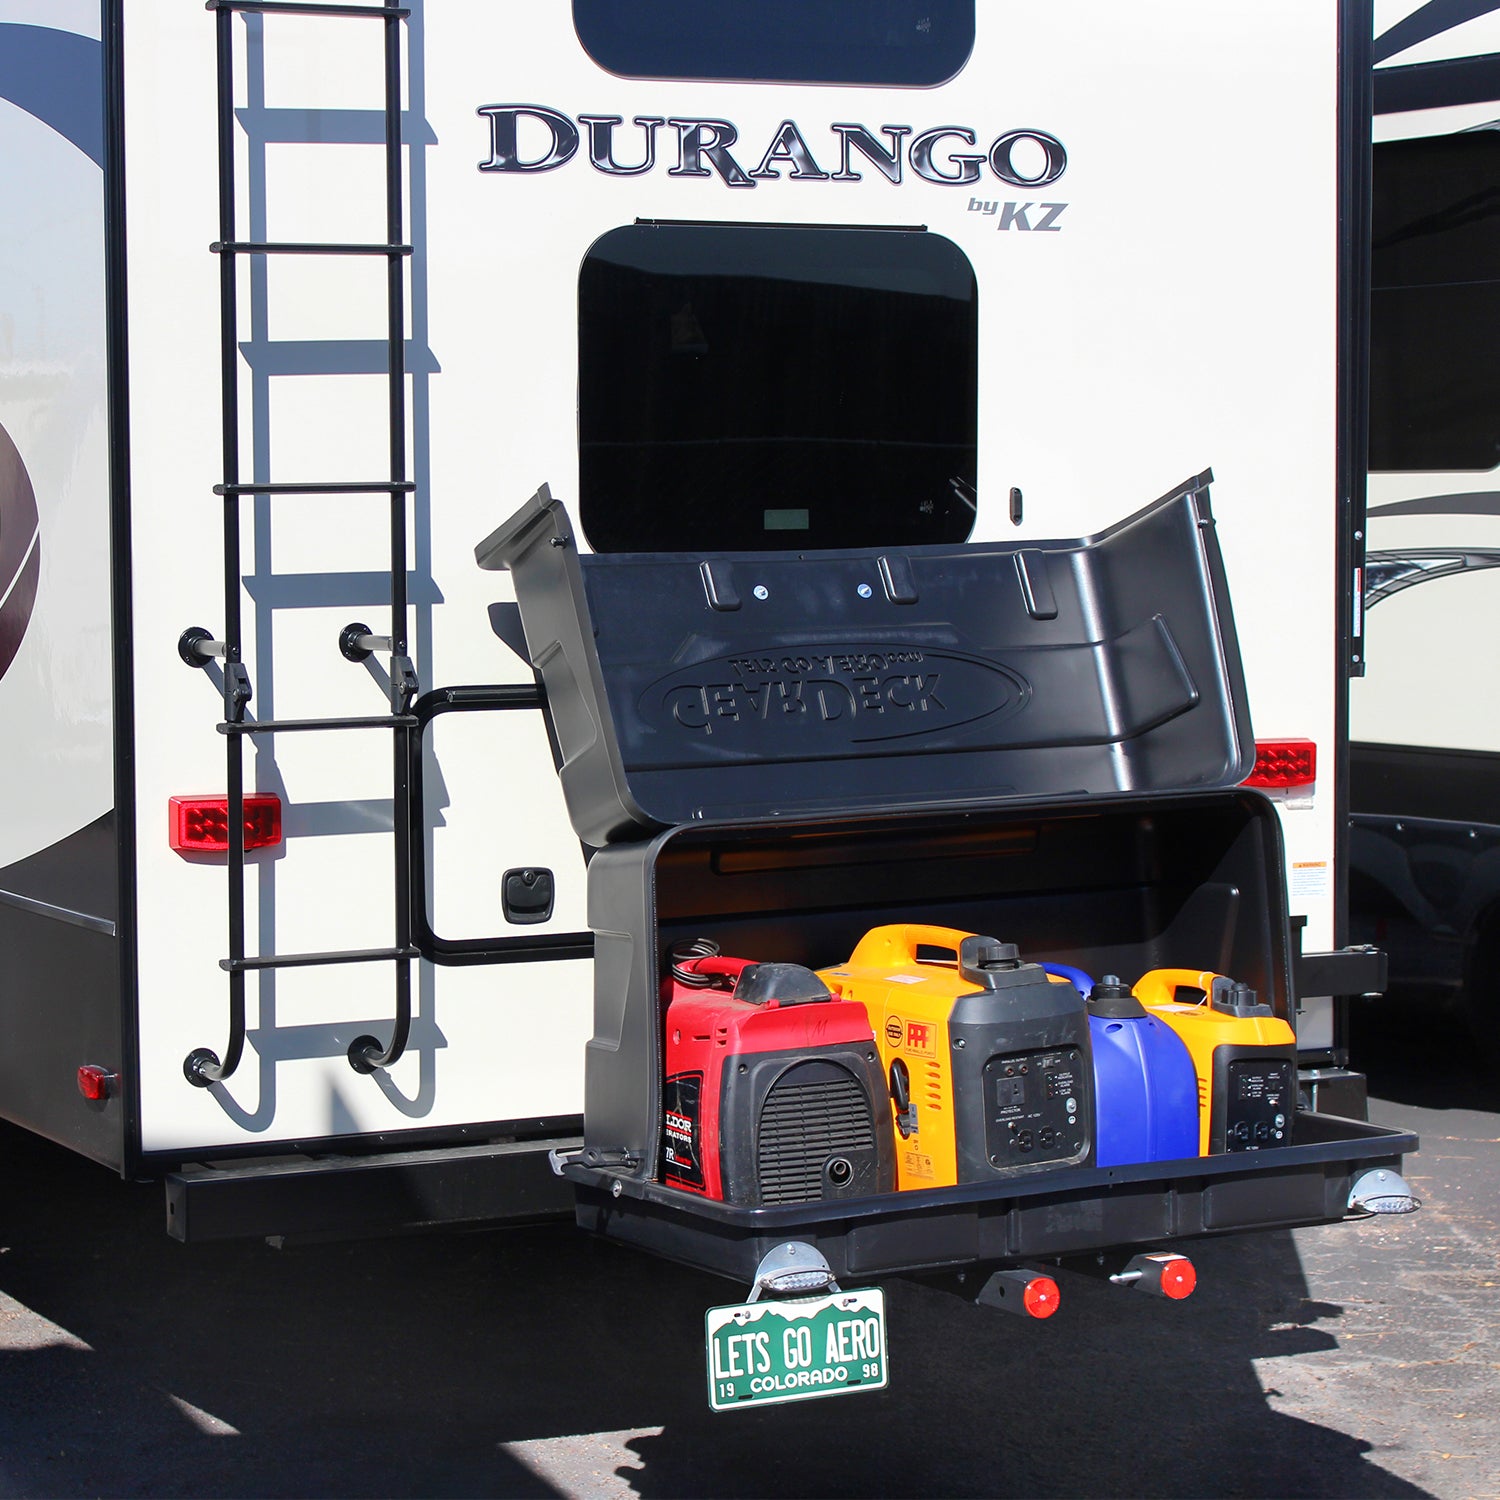 Holiday Gift Ideas For Your RV or Travel Trailer – Let's Go Aero